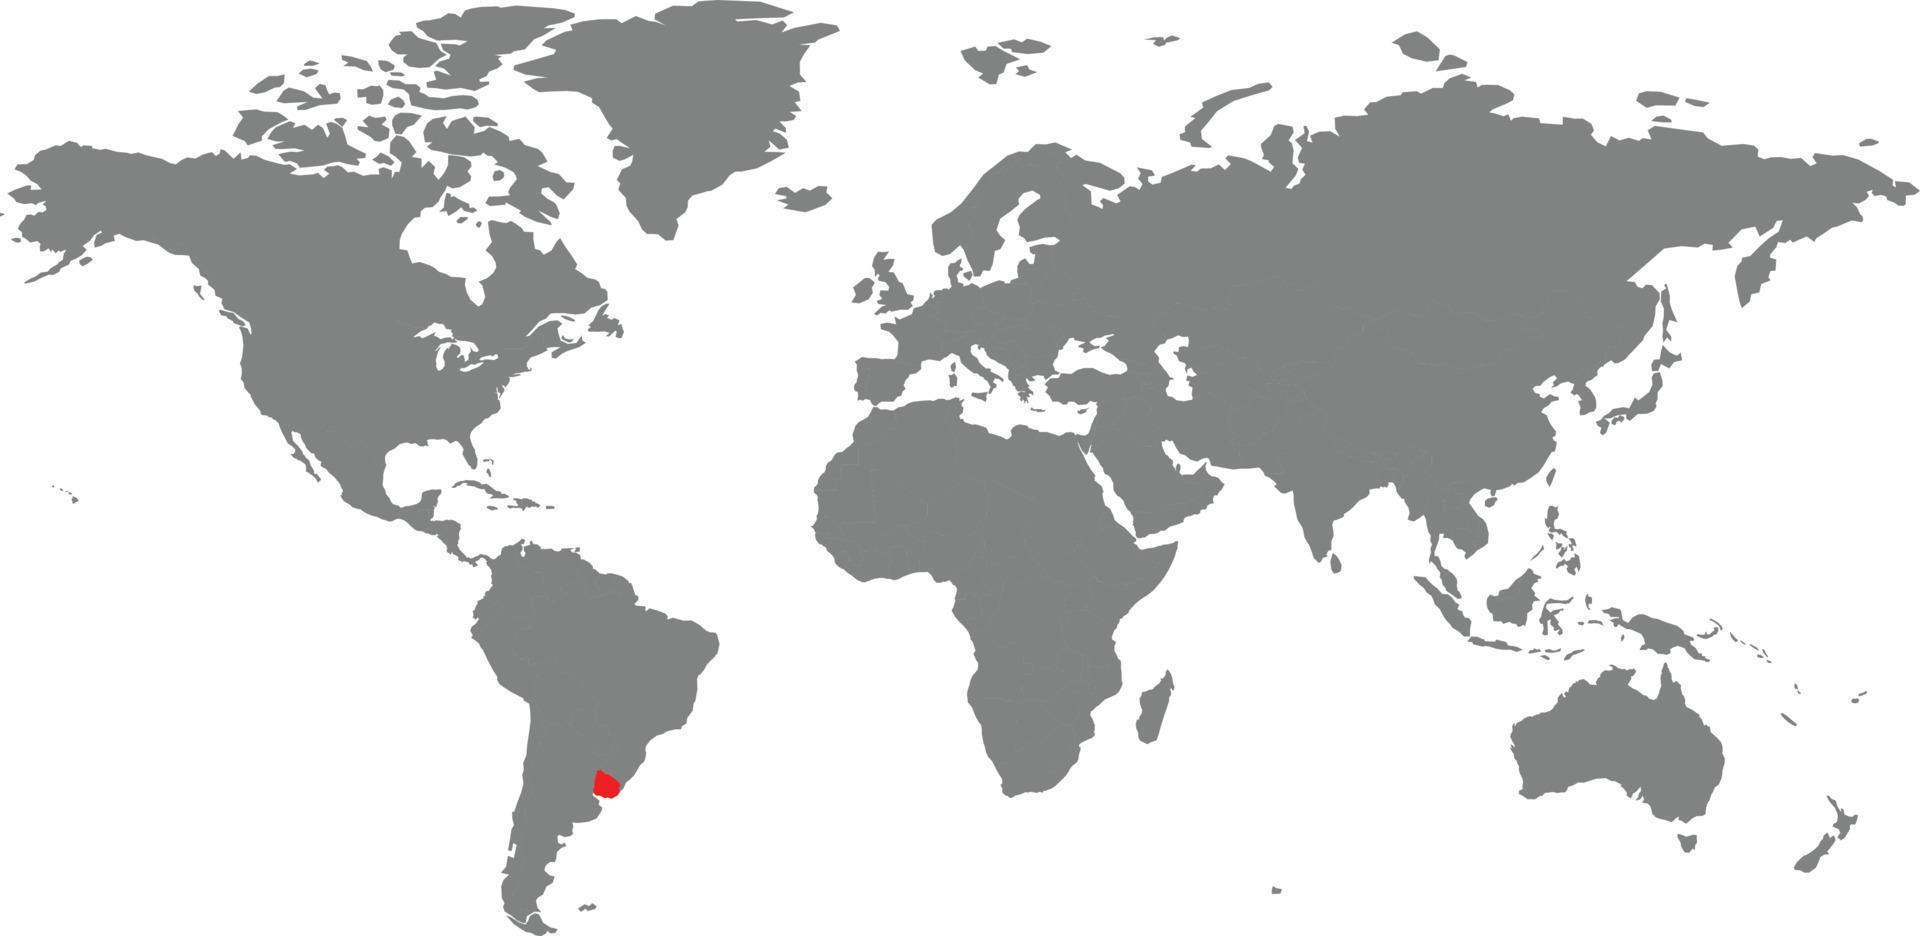 Uruguay map on the world map vector